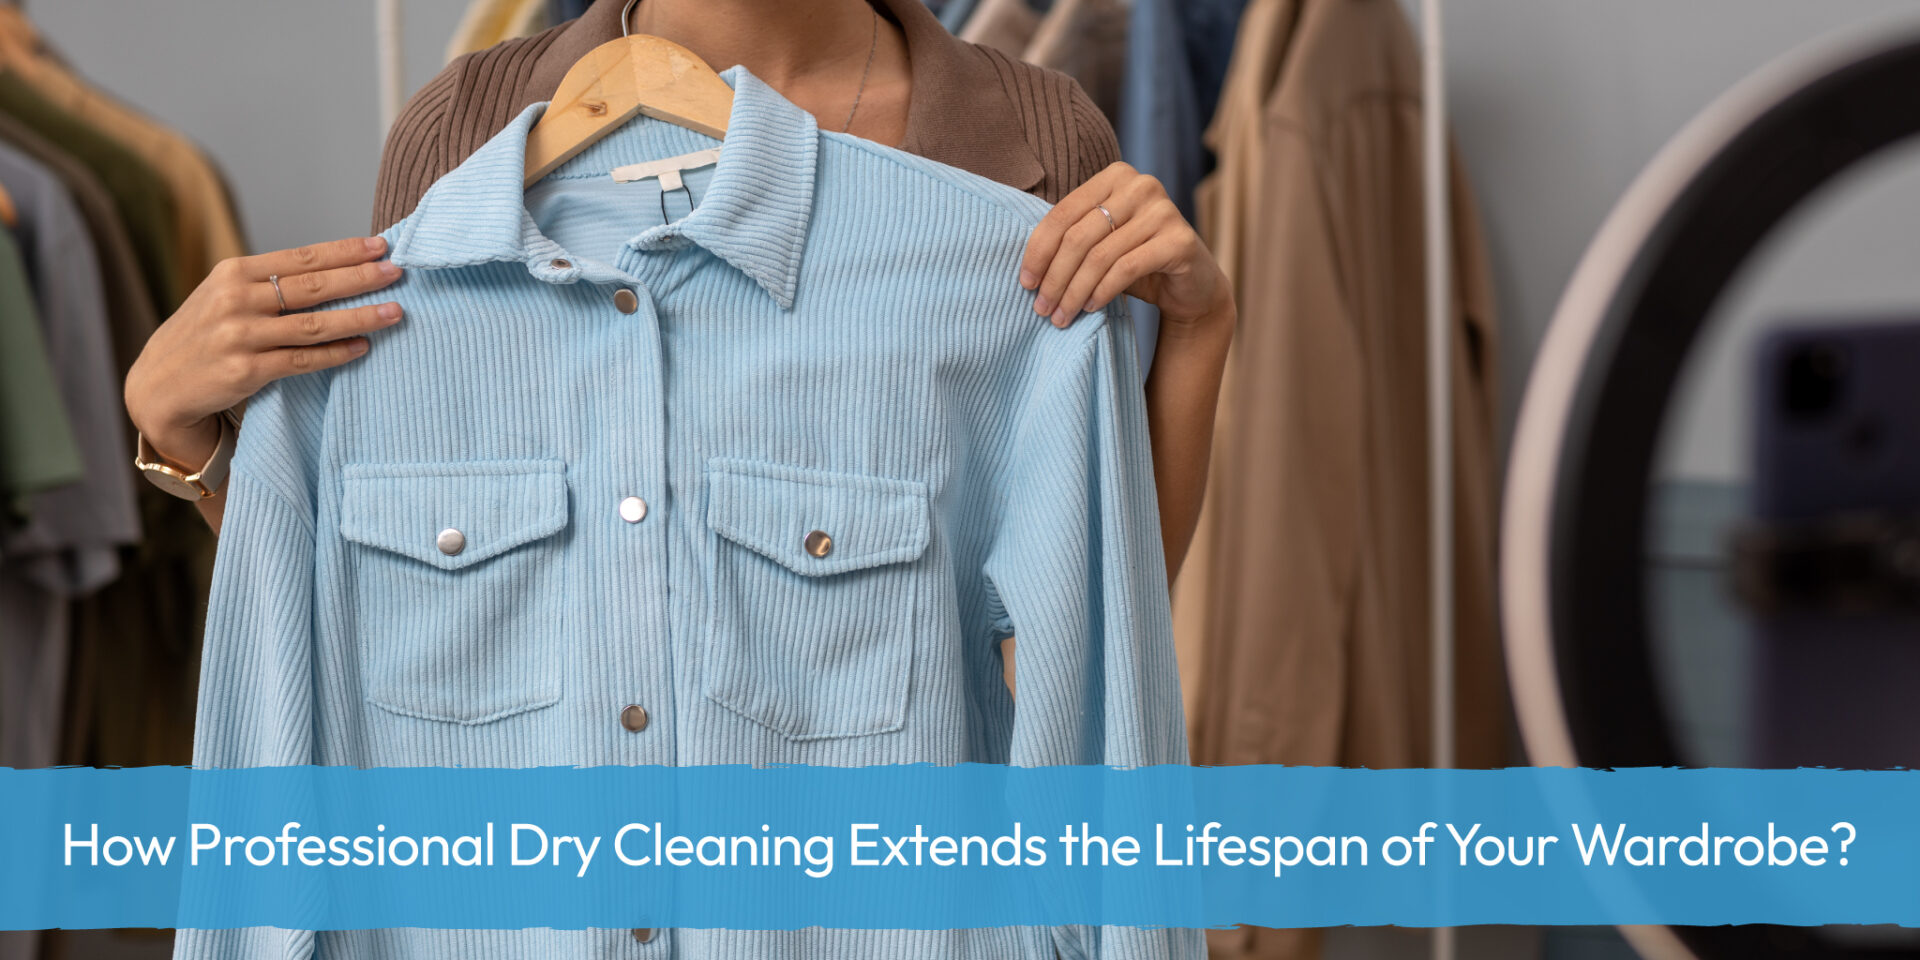 How Professional Dry Cleaning Extends the Lifespan of Your Wardrobe